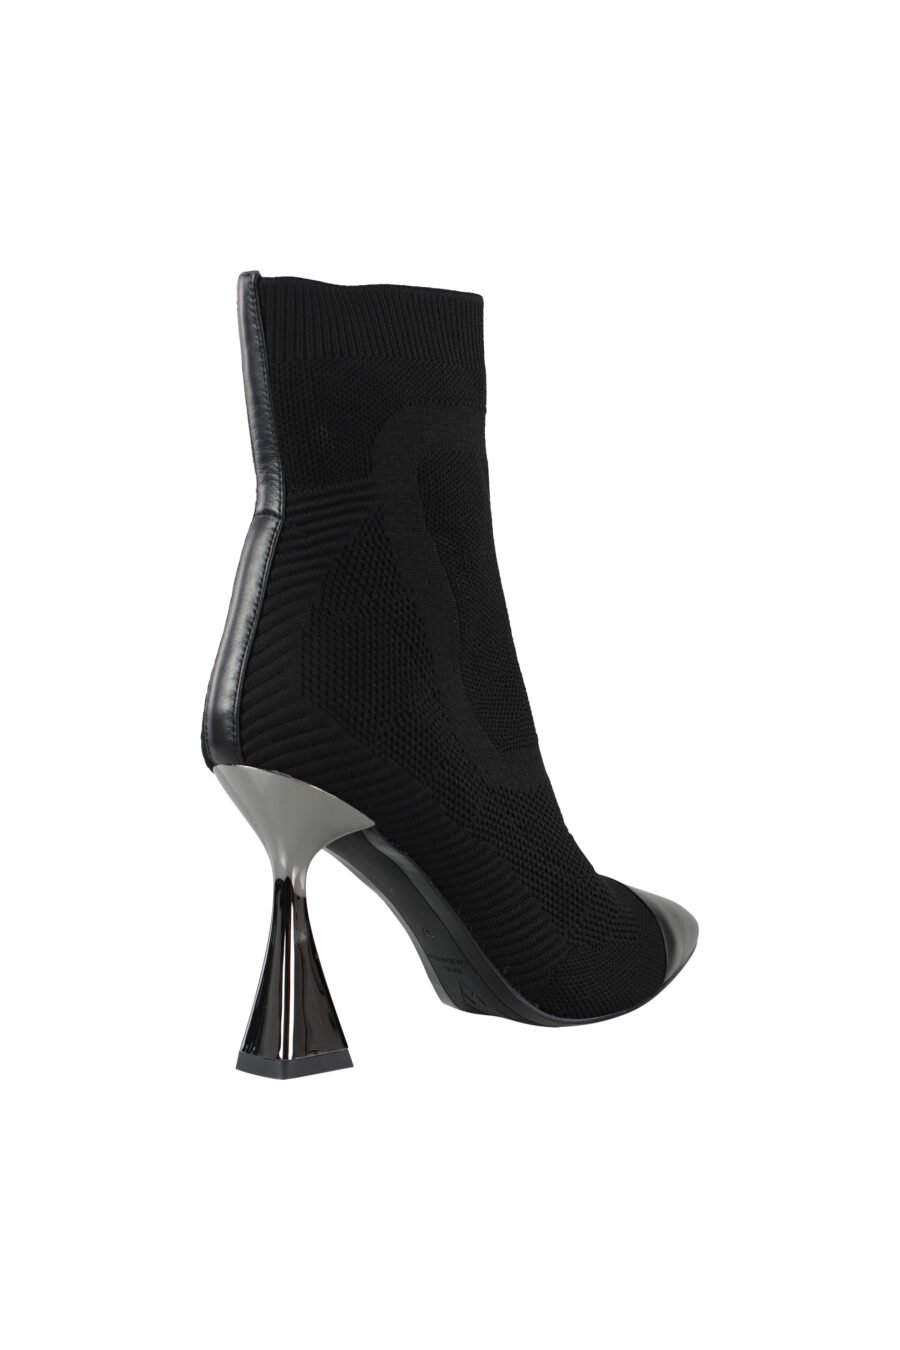 Black ankle sock ankle boots with white mini logo - IMG 9603